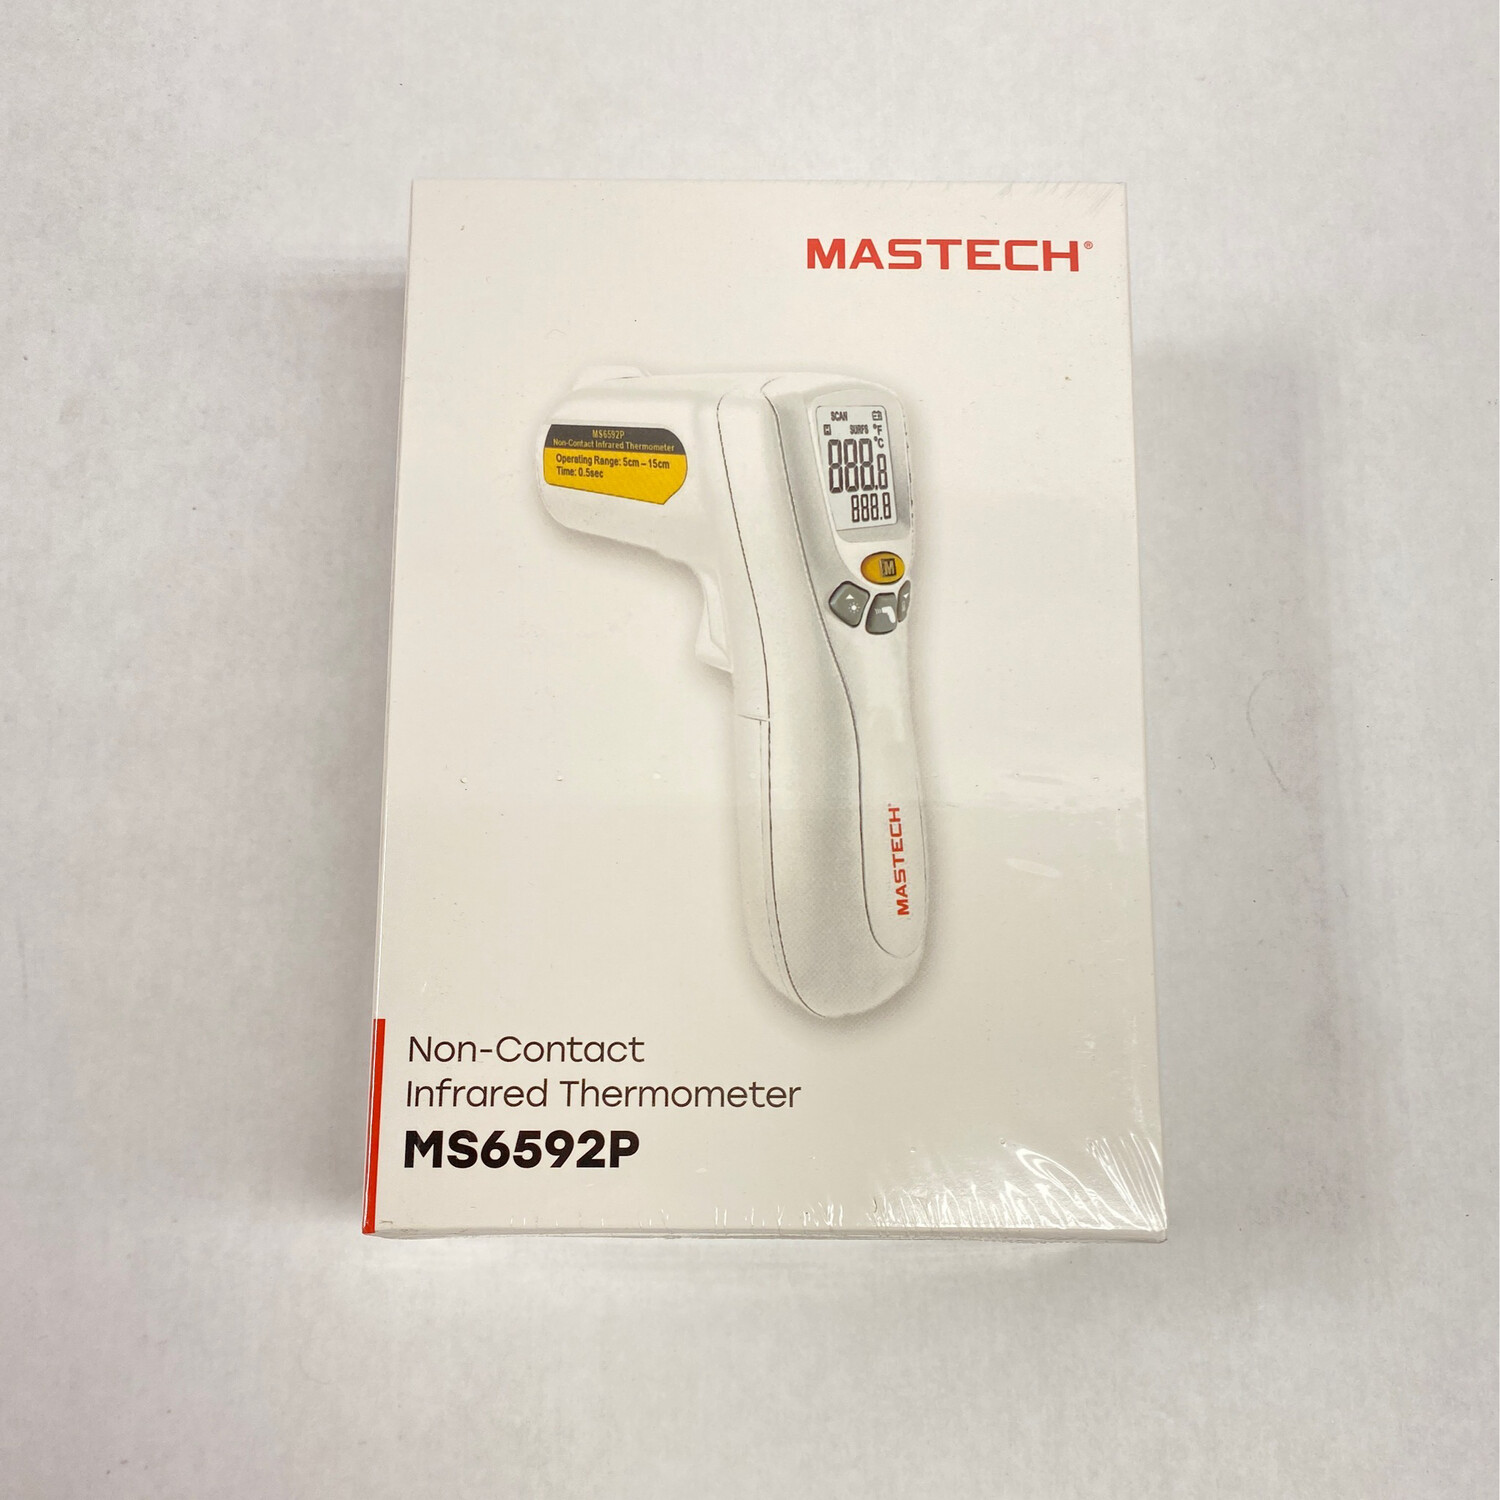 Mastech Non-Contact Infrared Thermometer, MS6592P